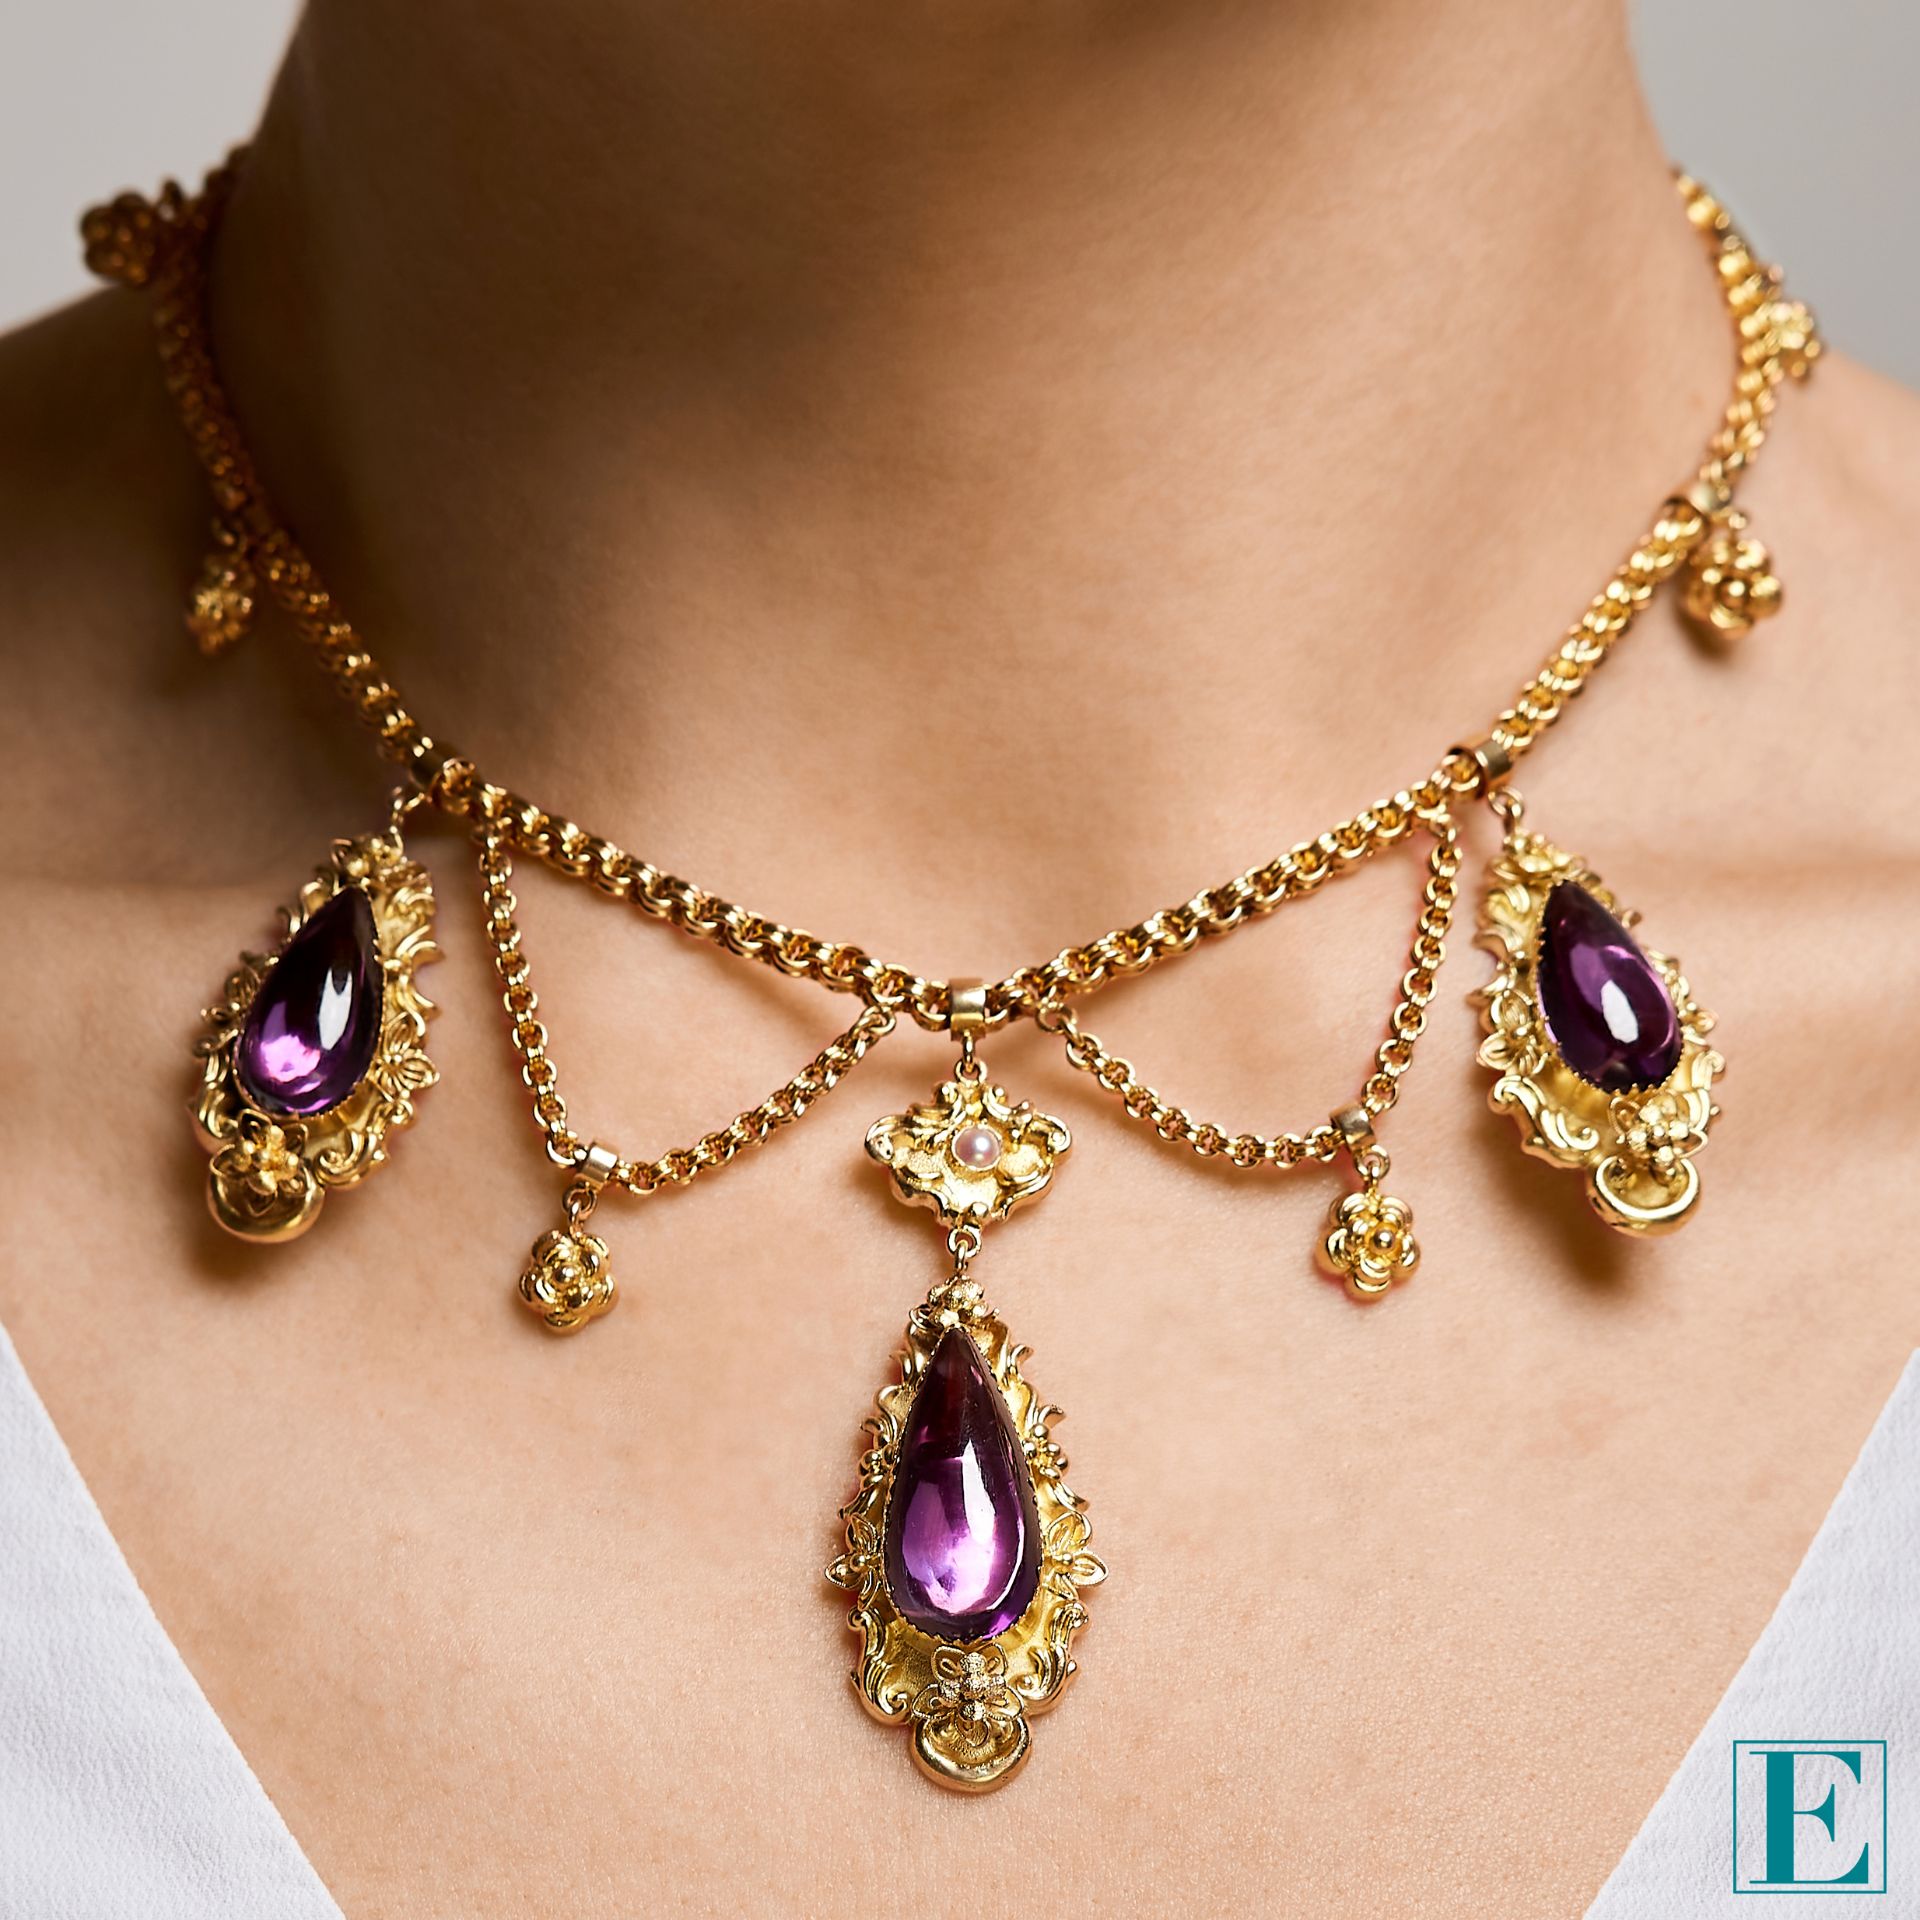 ANTIQUE AMETHYST AND PEARL NECKLACE, 19TH CENTURY in 15ct yellow gold, the fancy link necklace - Image 2 of 2